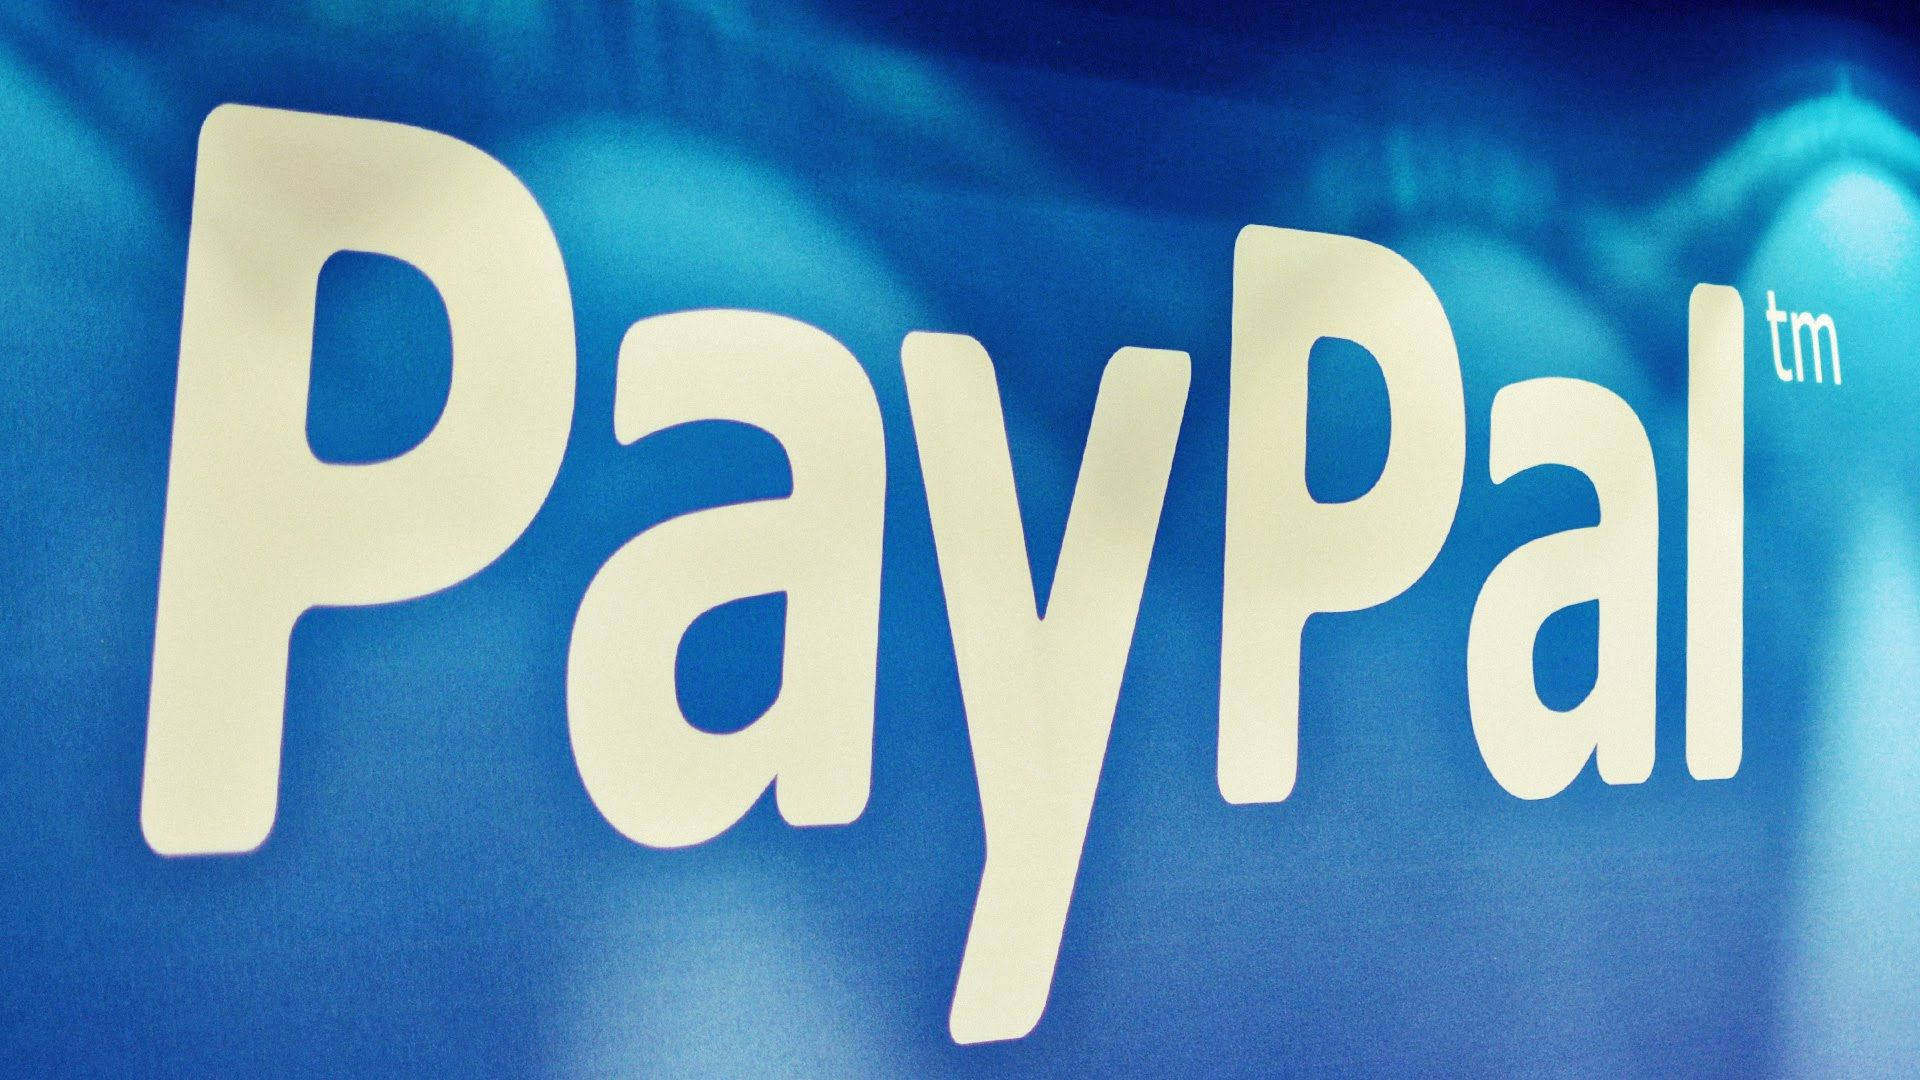 Paypal Brand With Glossy Lights Background